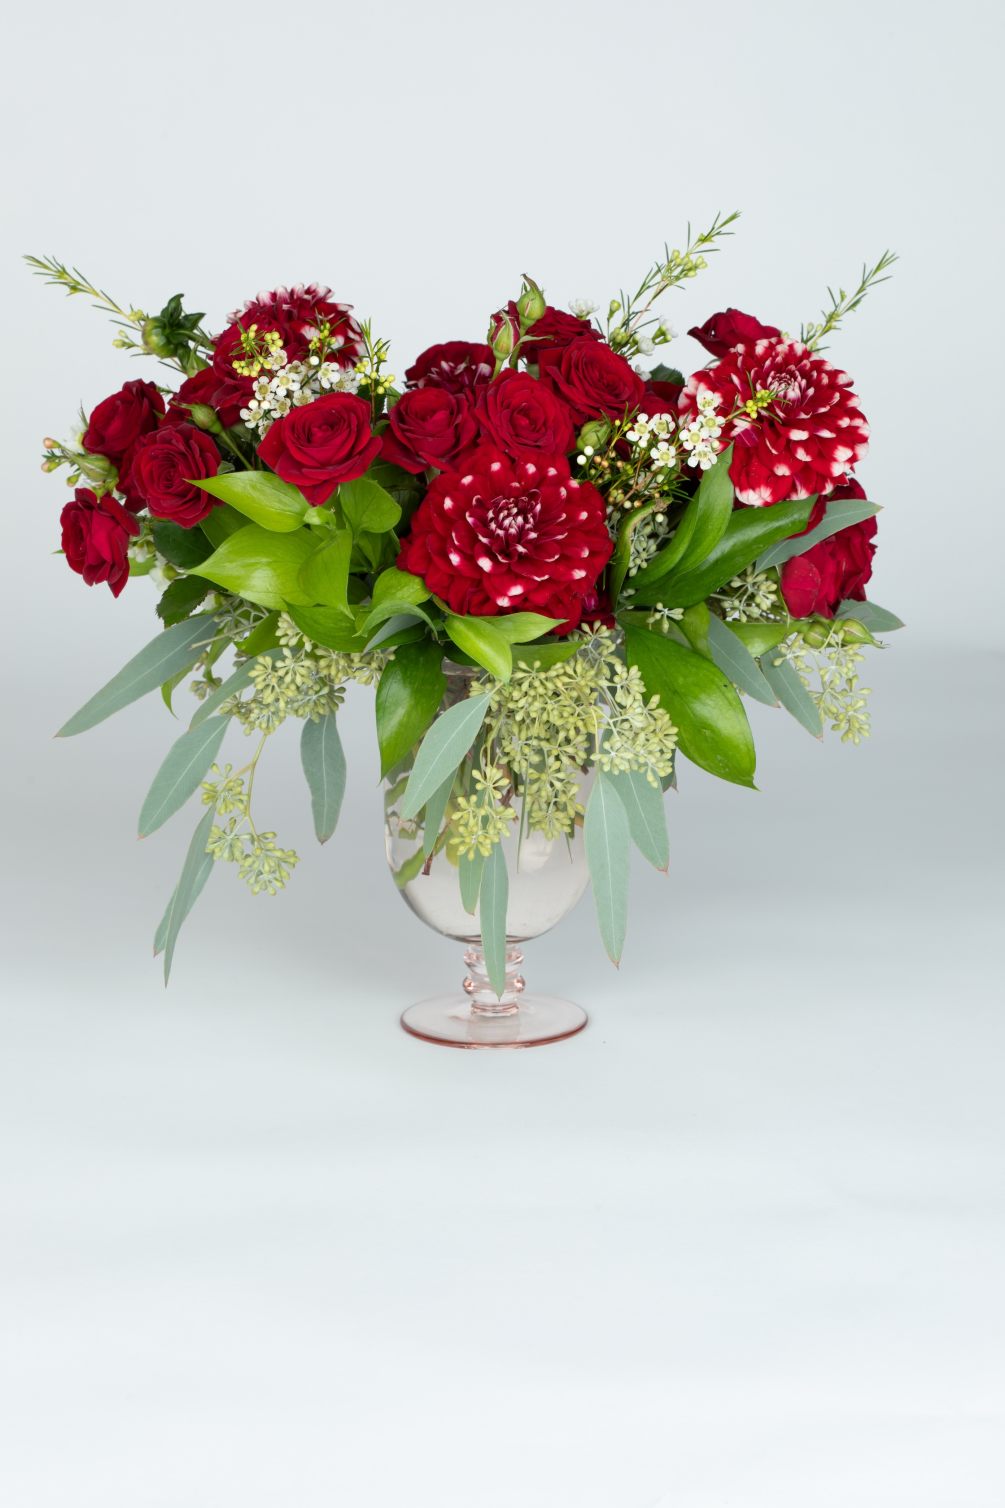 Red spray roses with dahlias and seeded eucalyptus and wax flower